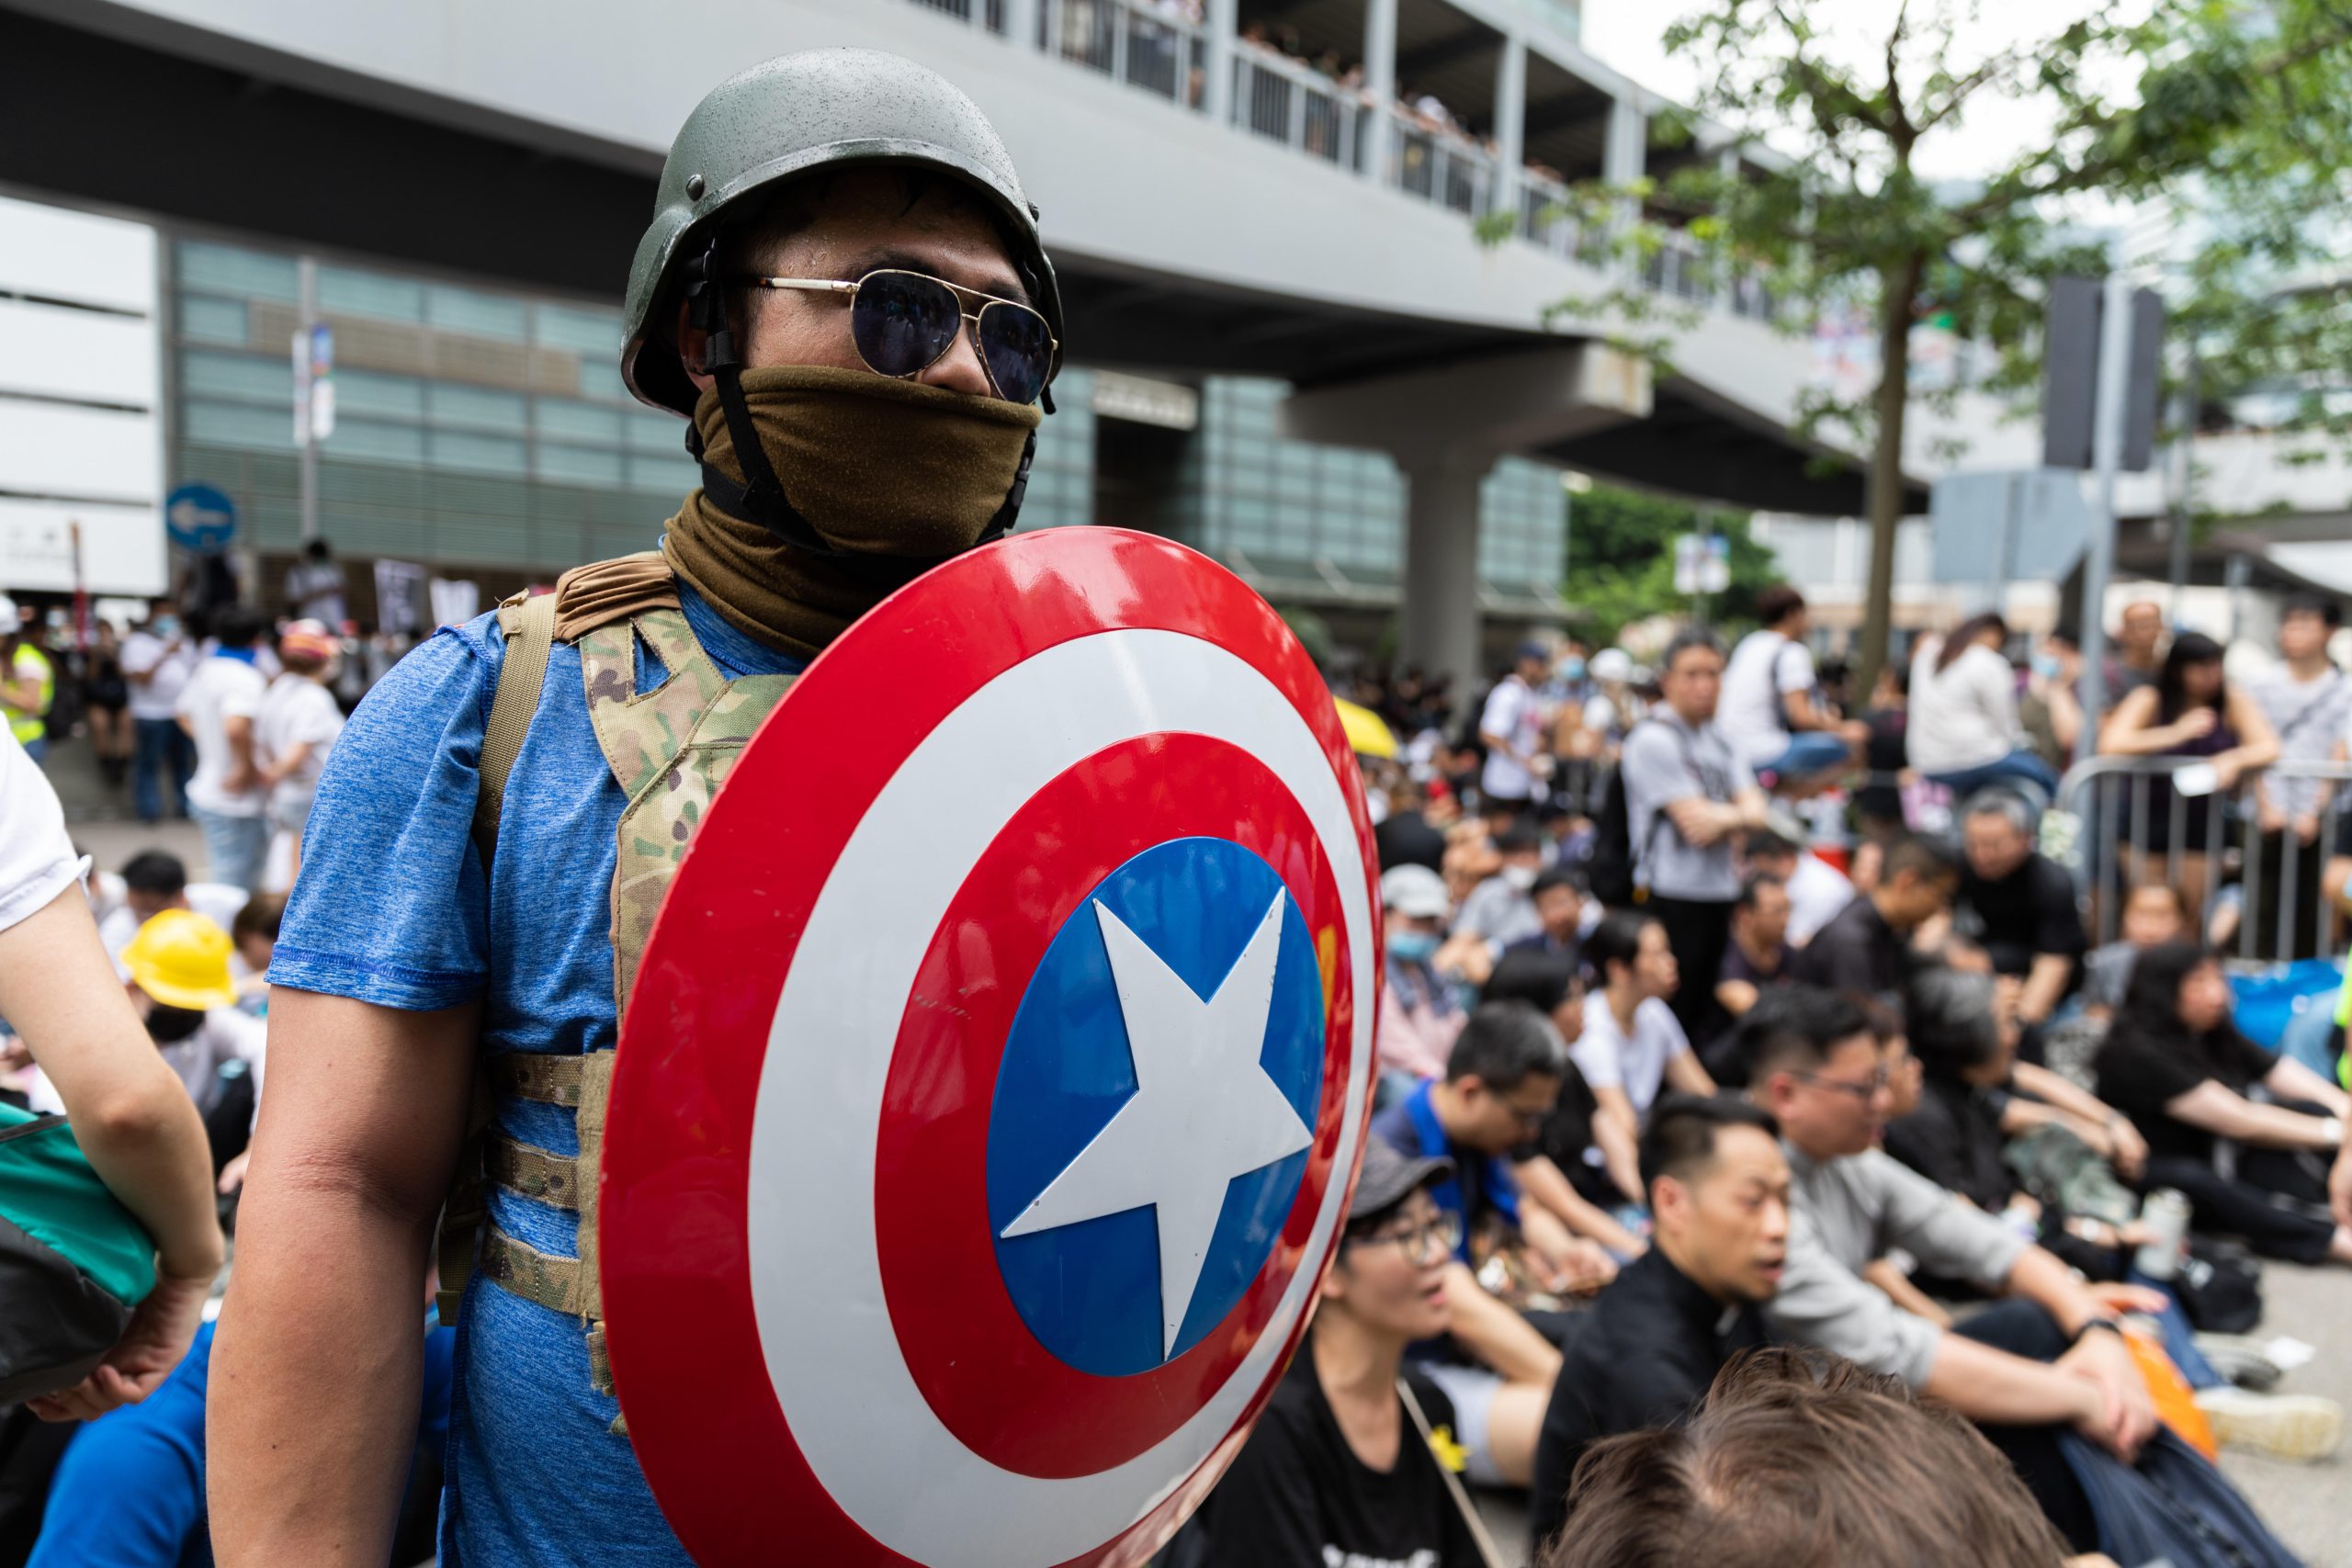 Hong Kong’s freedoms under further attack as ‘Captain America’ is jailed